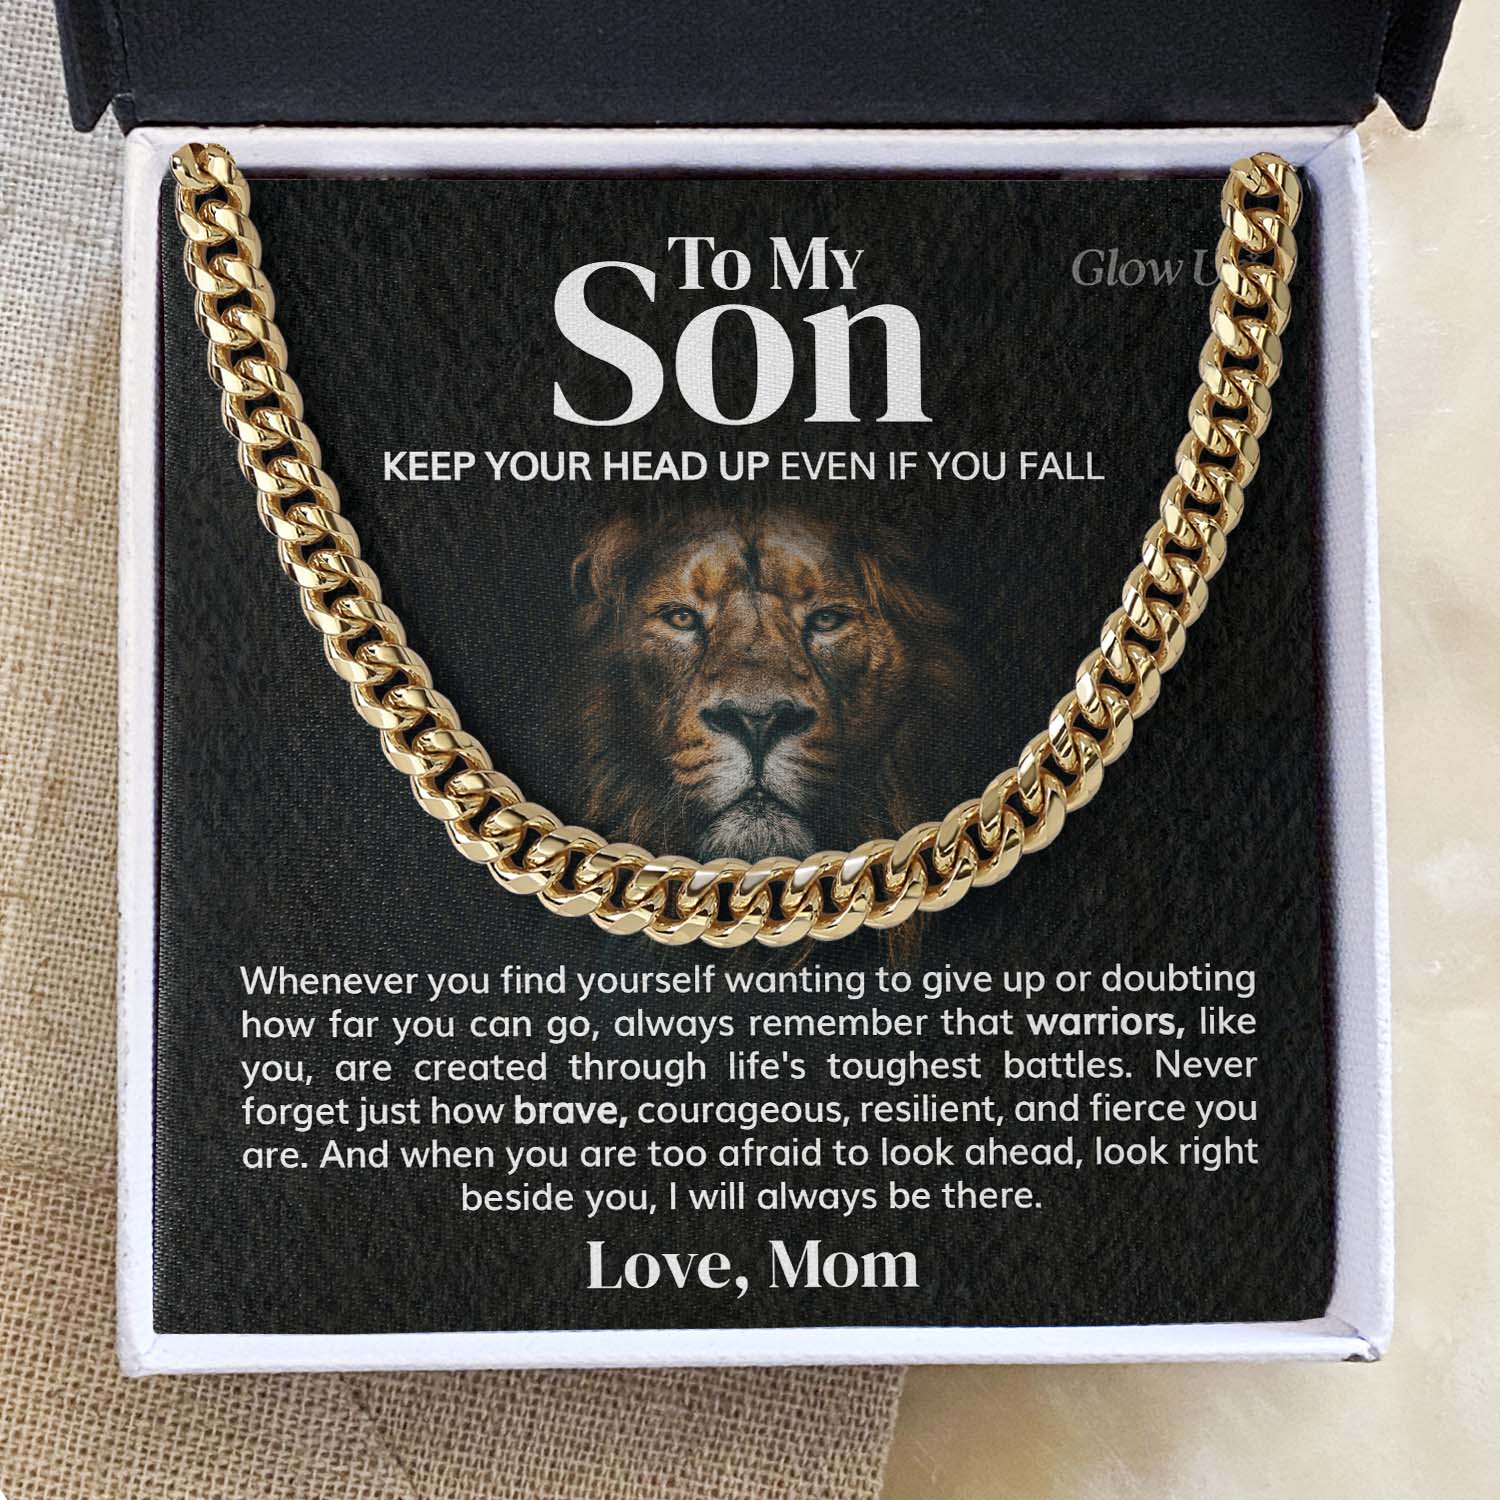 GlowUp 18k Gold Finish / Two-Toned Box To My Son - Keep your head up even if you fall - Cuban Link Chain Necklace